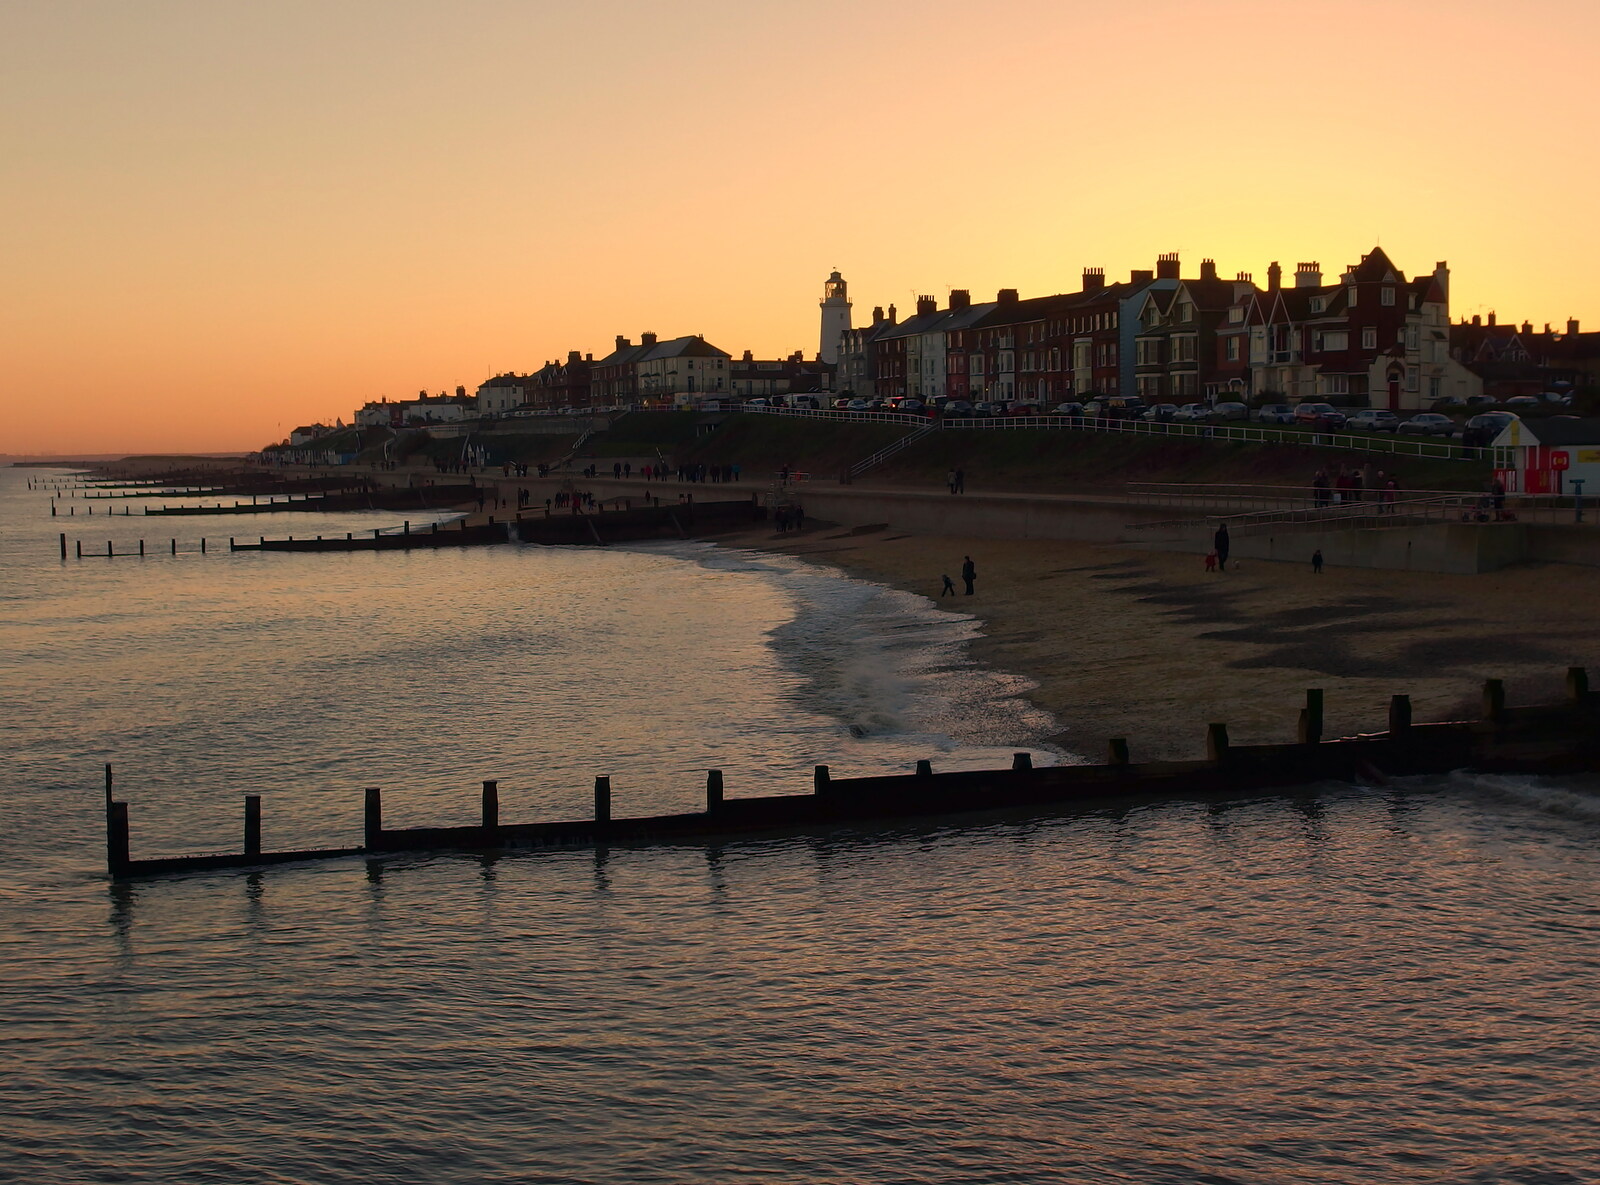 An HDR version of Southwold in the sunset from Post-Christmas Southwold, Suffolk - 29th December 2013